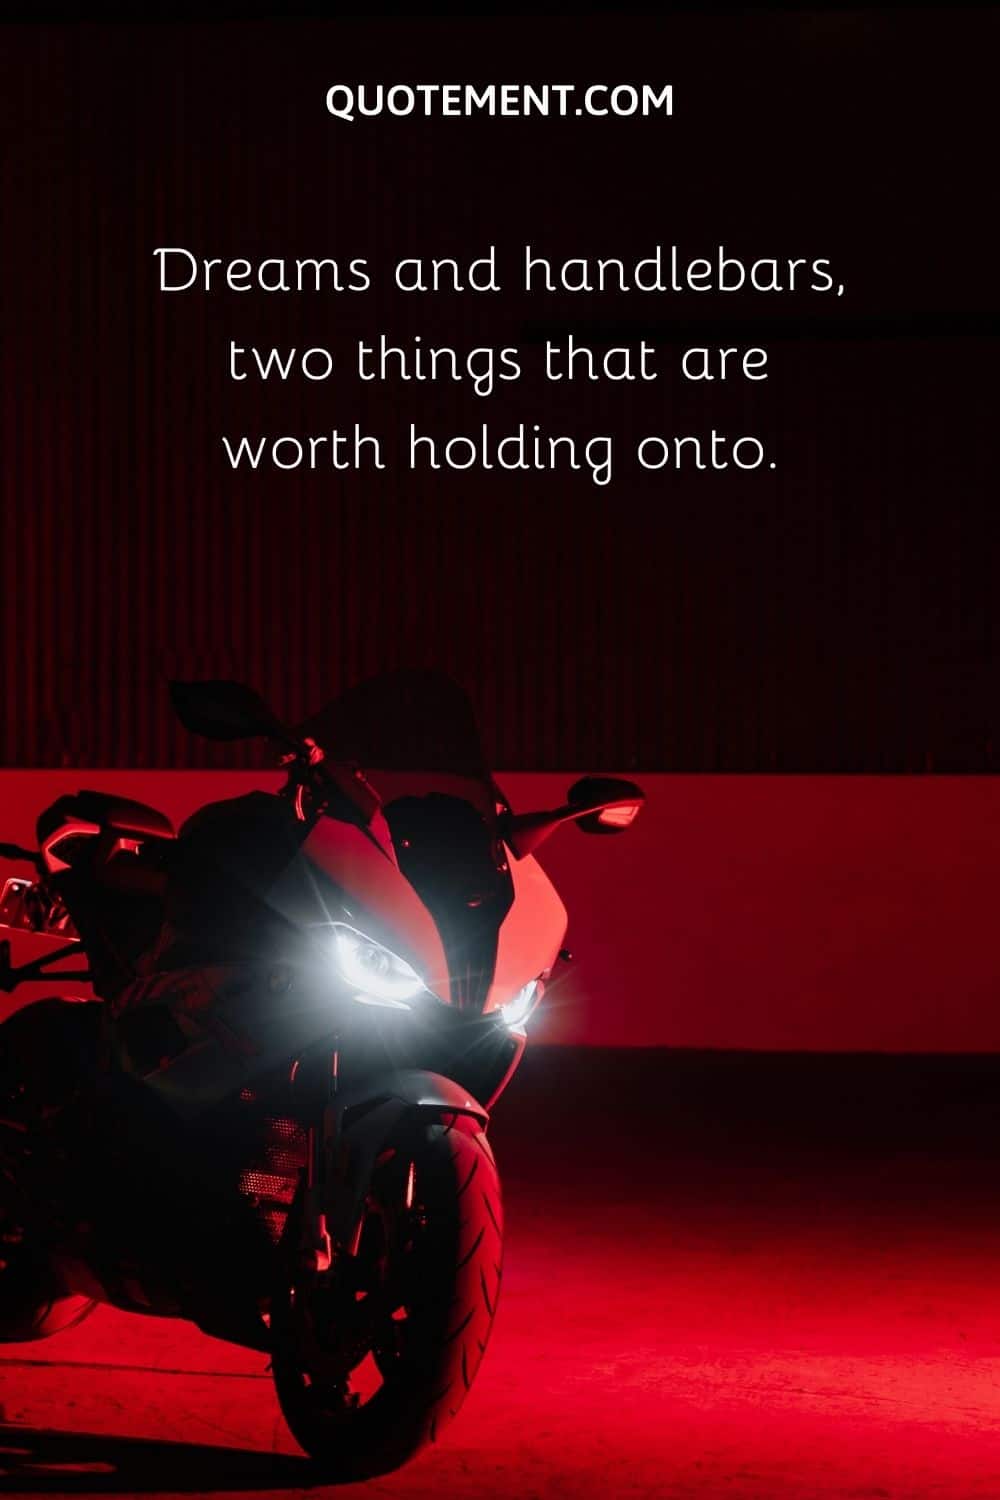 Dreams and handlebars, two things that are worth holding onto.